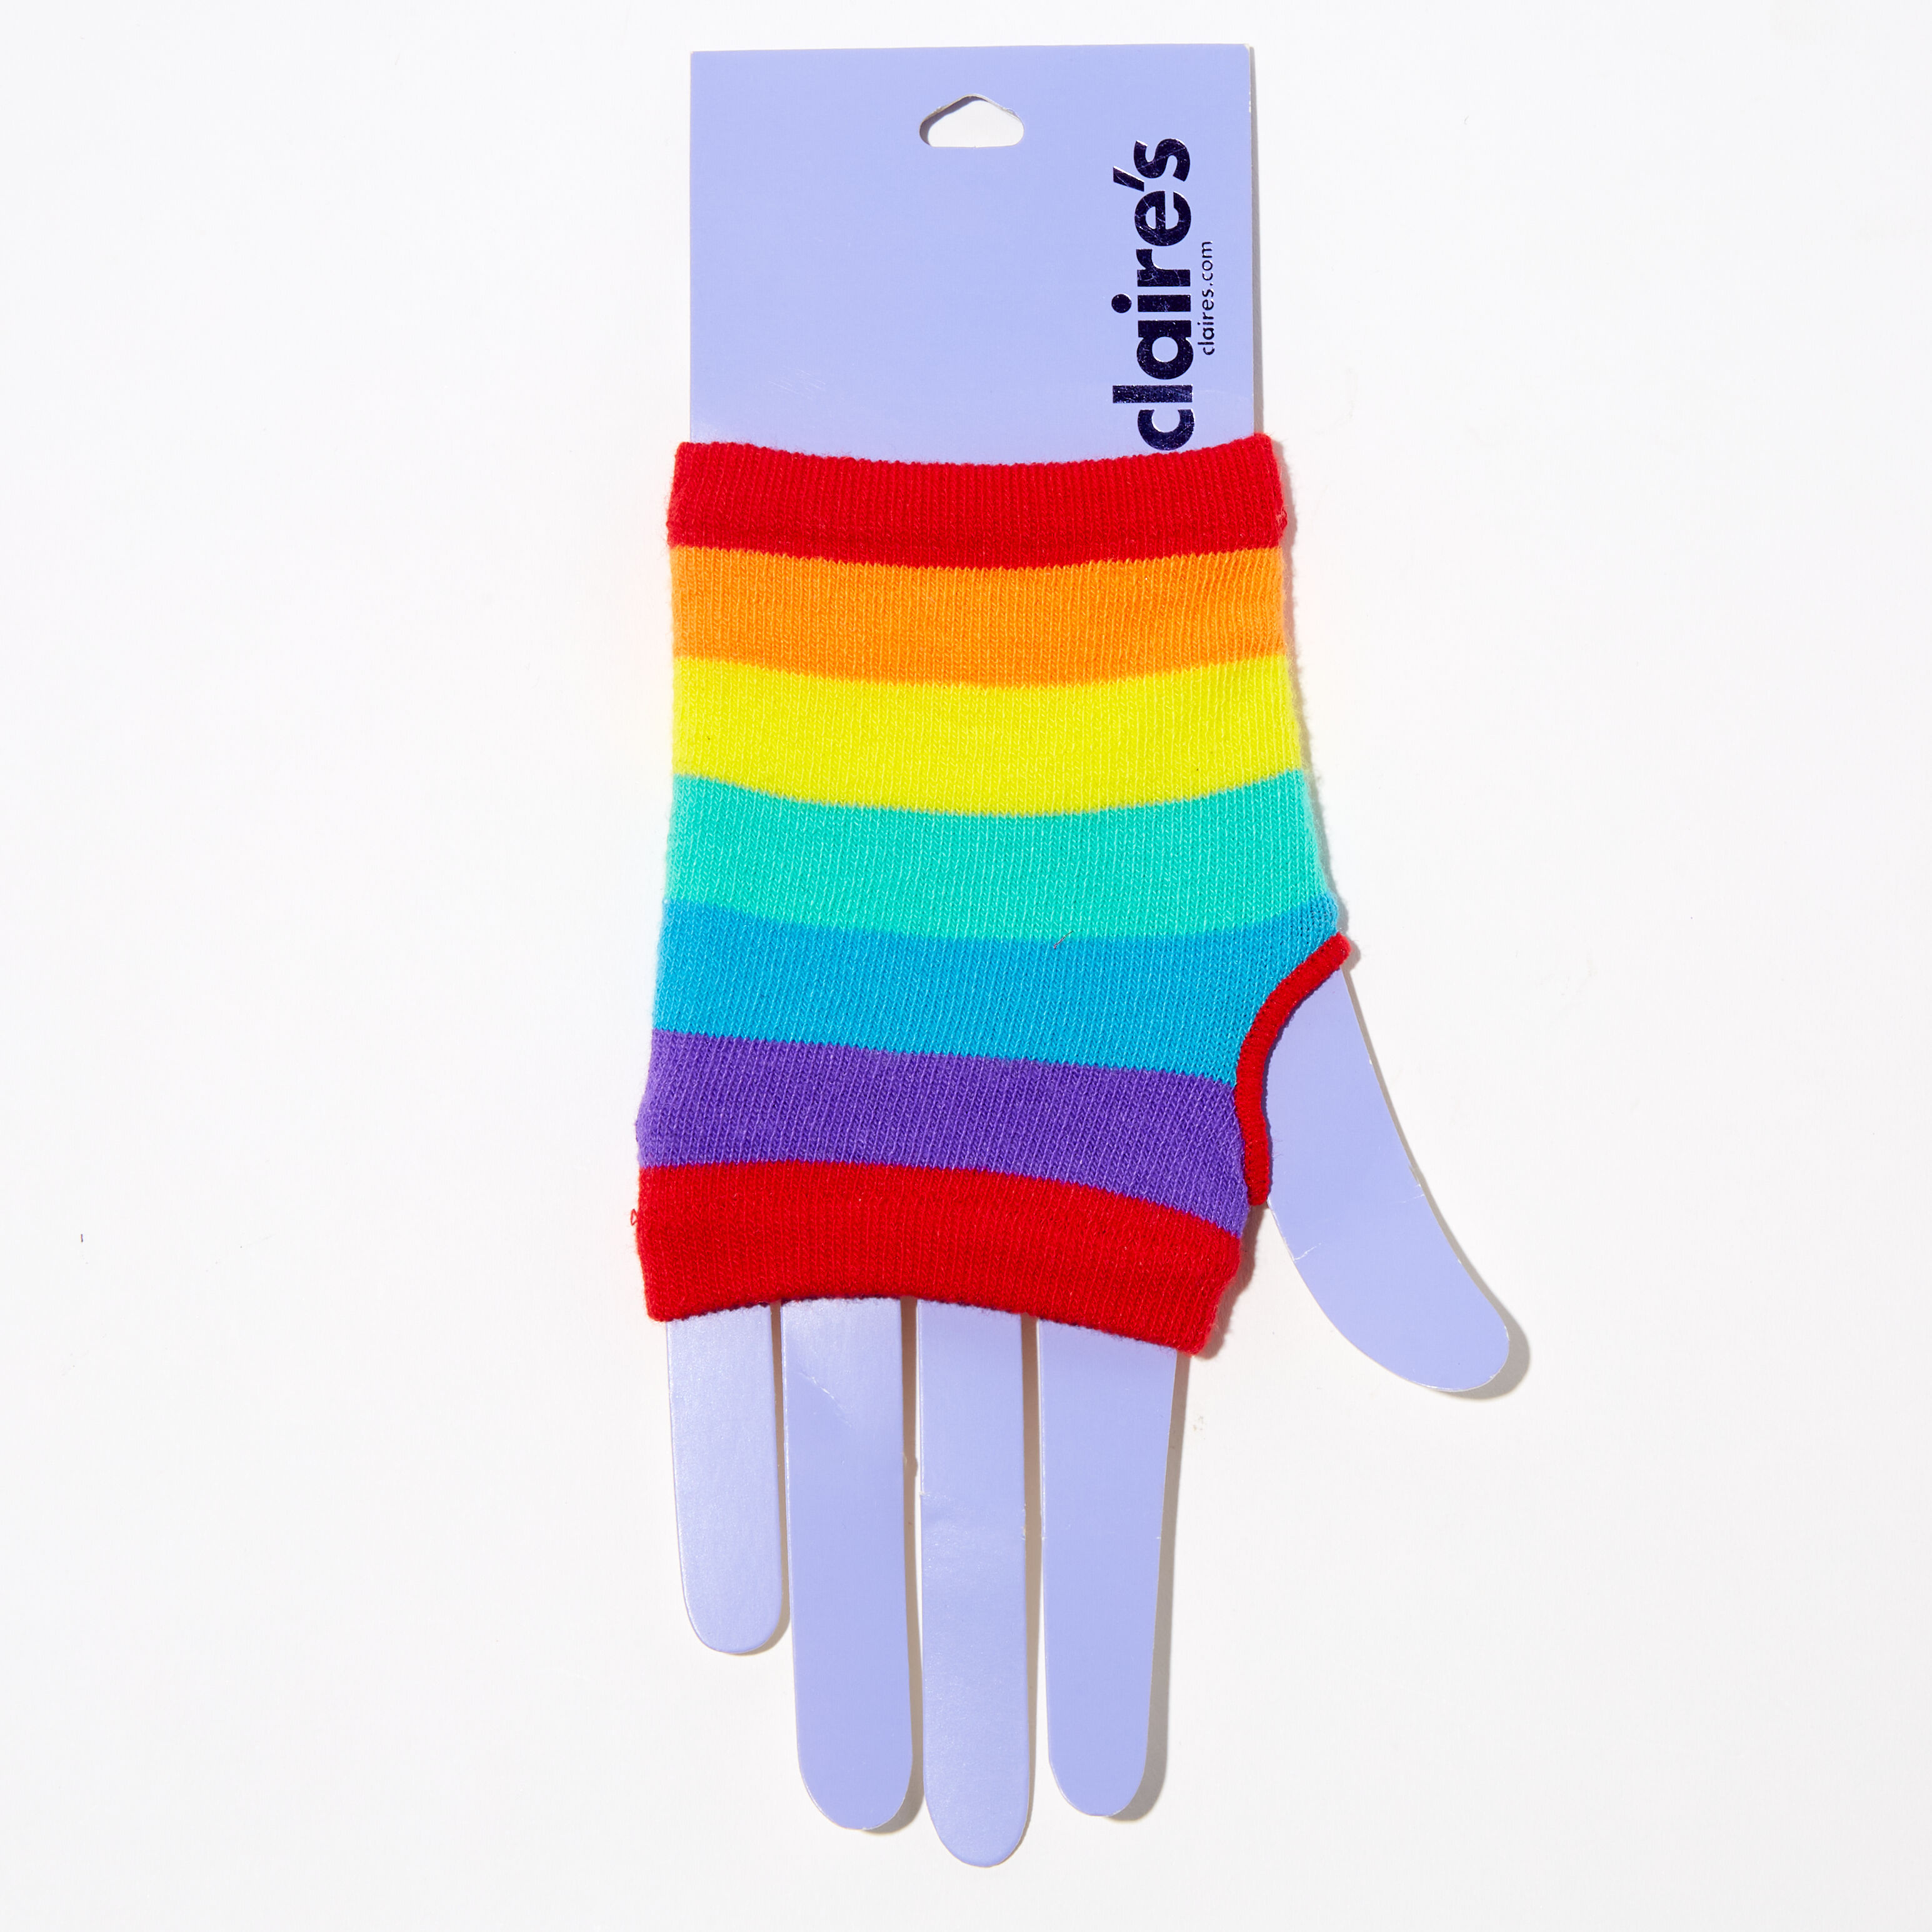 Claire's Girl's Rainbow Striped Short Arm Warmers